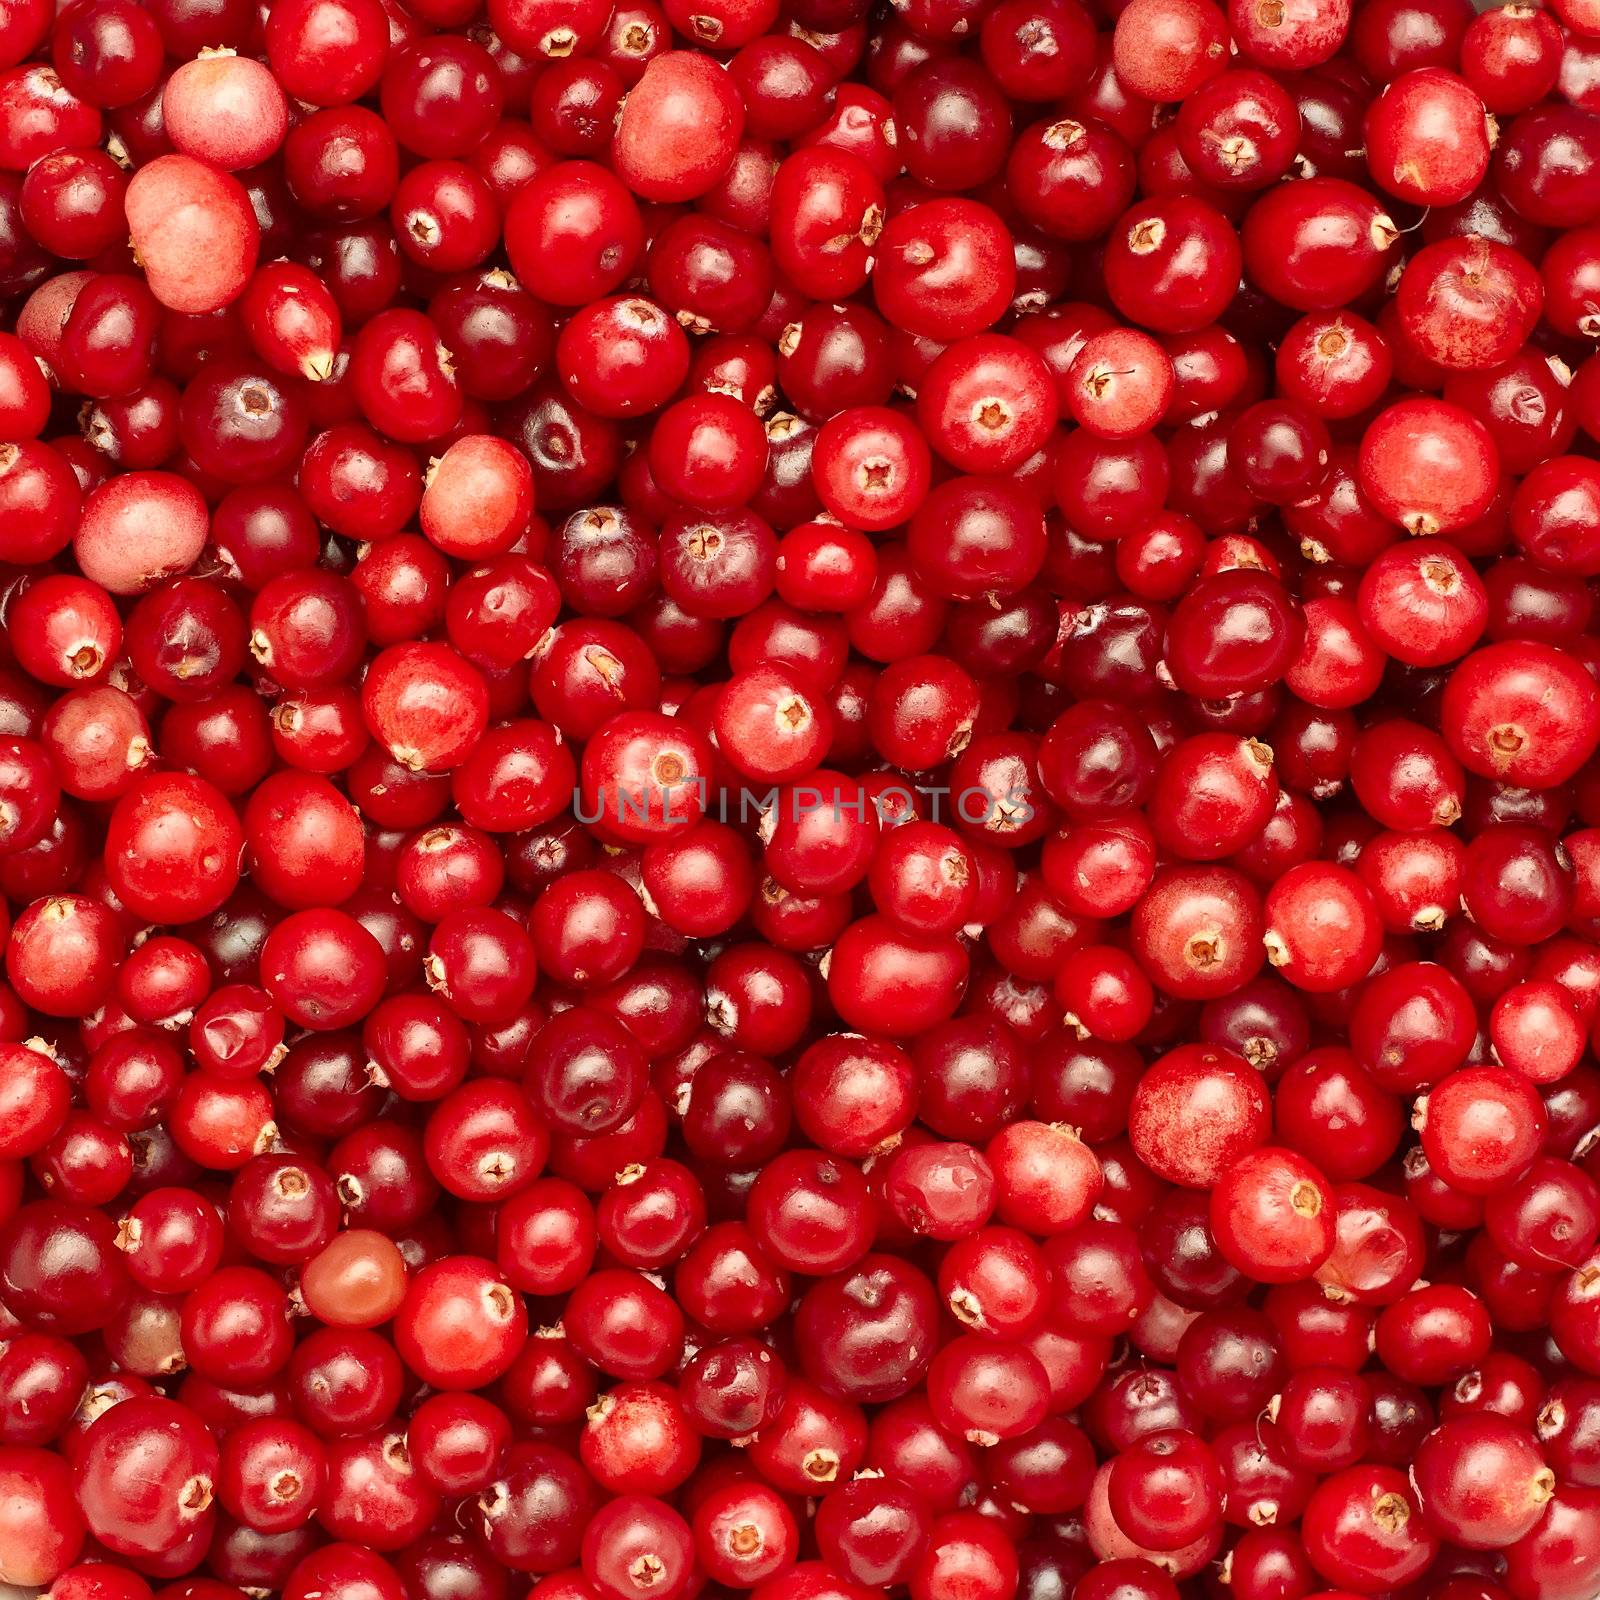 Many small cranberry berries by qiiip